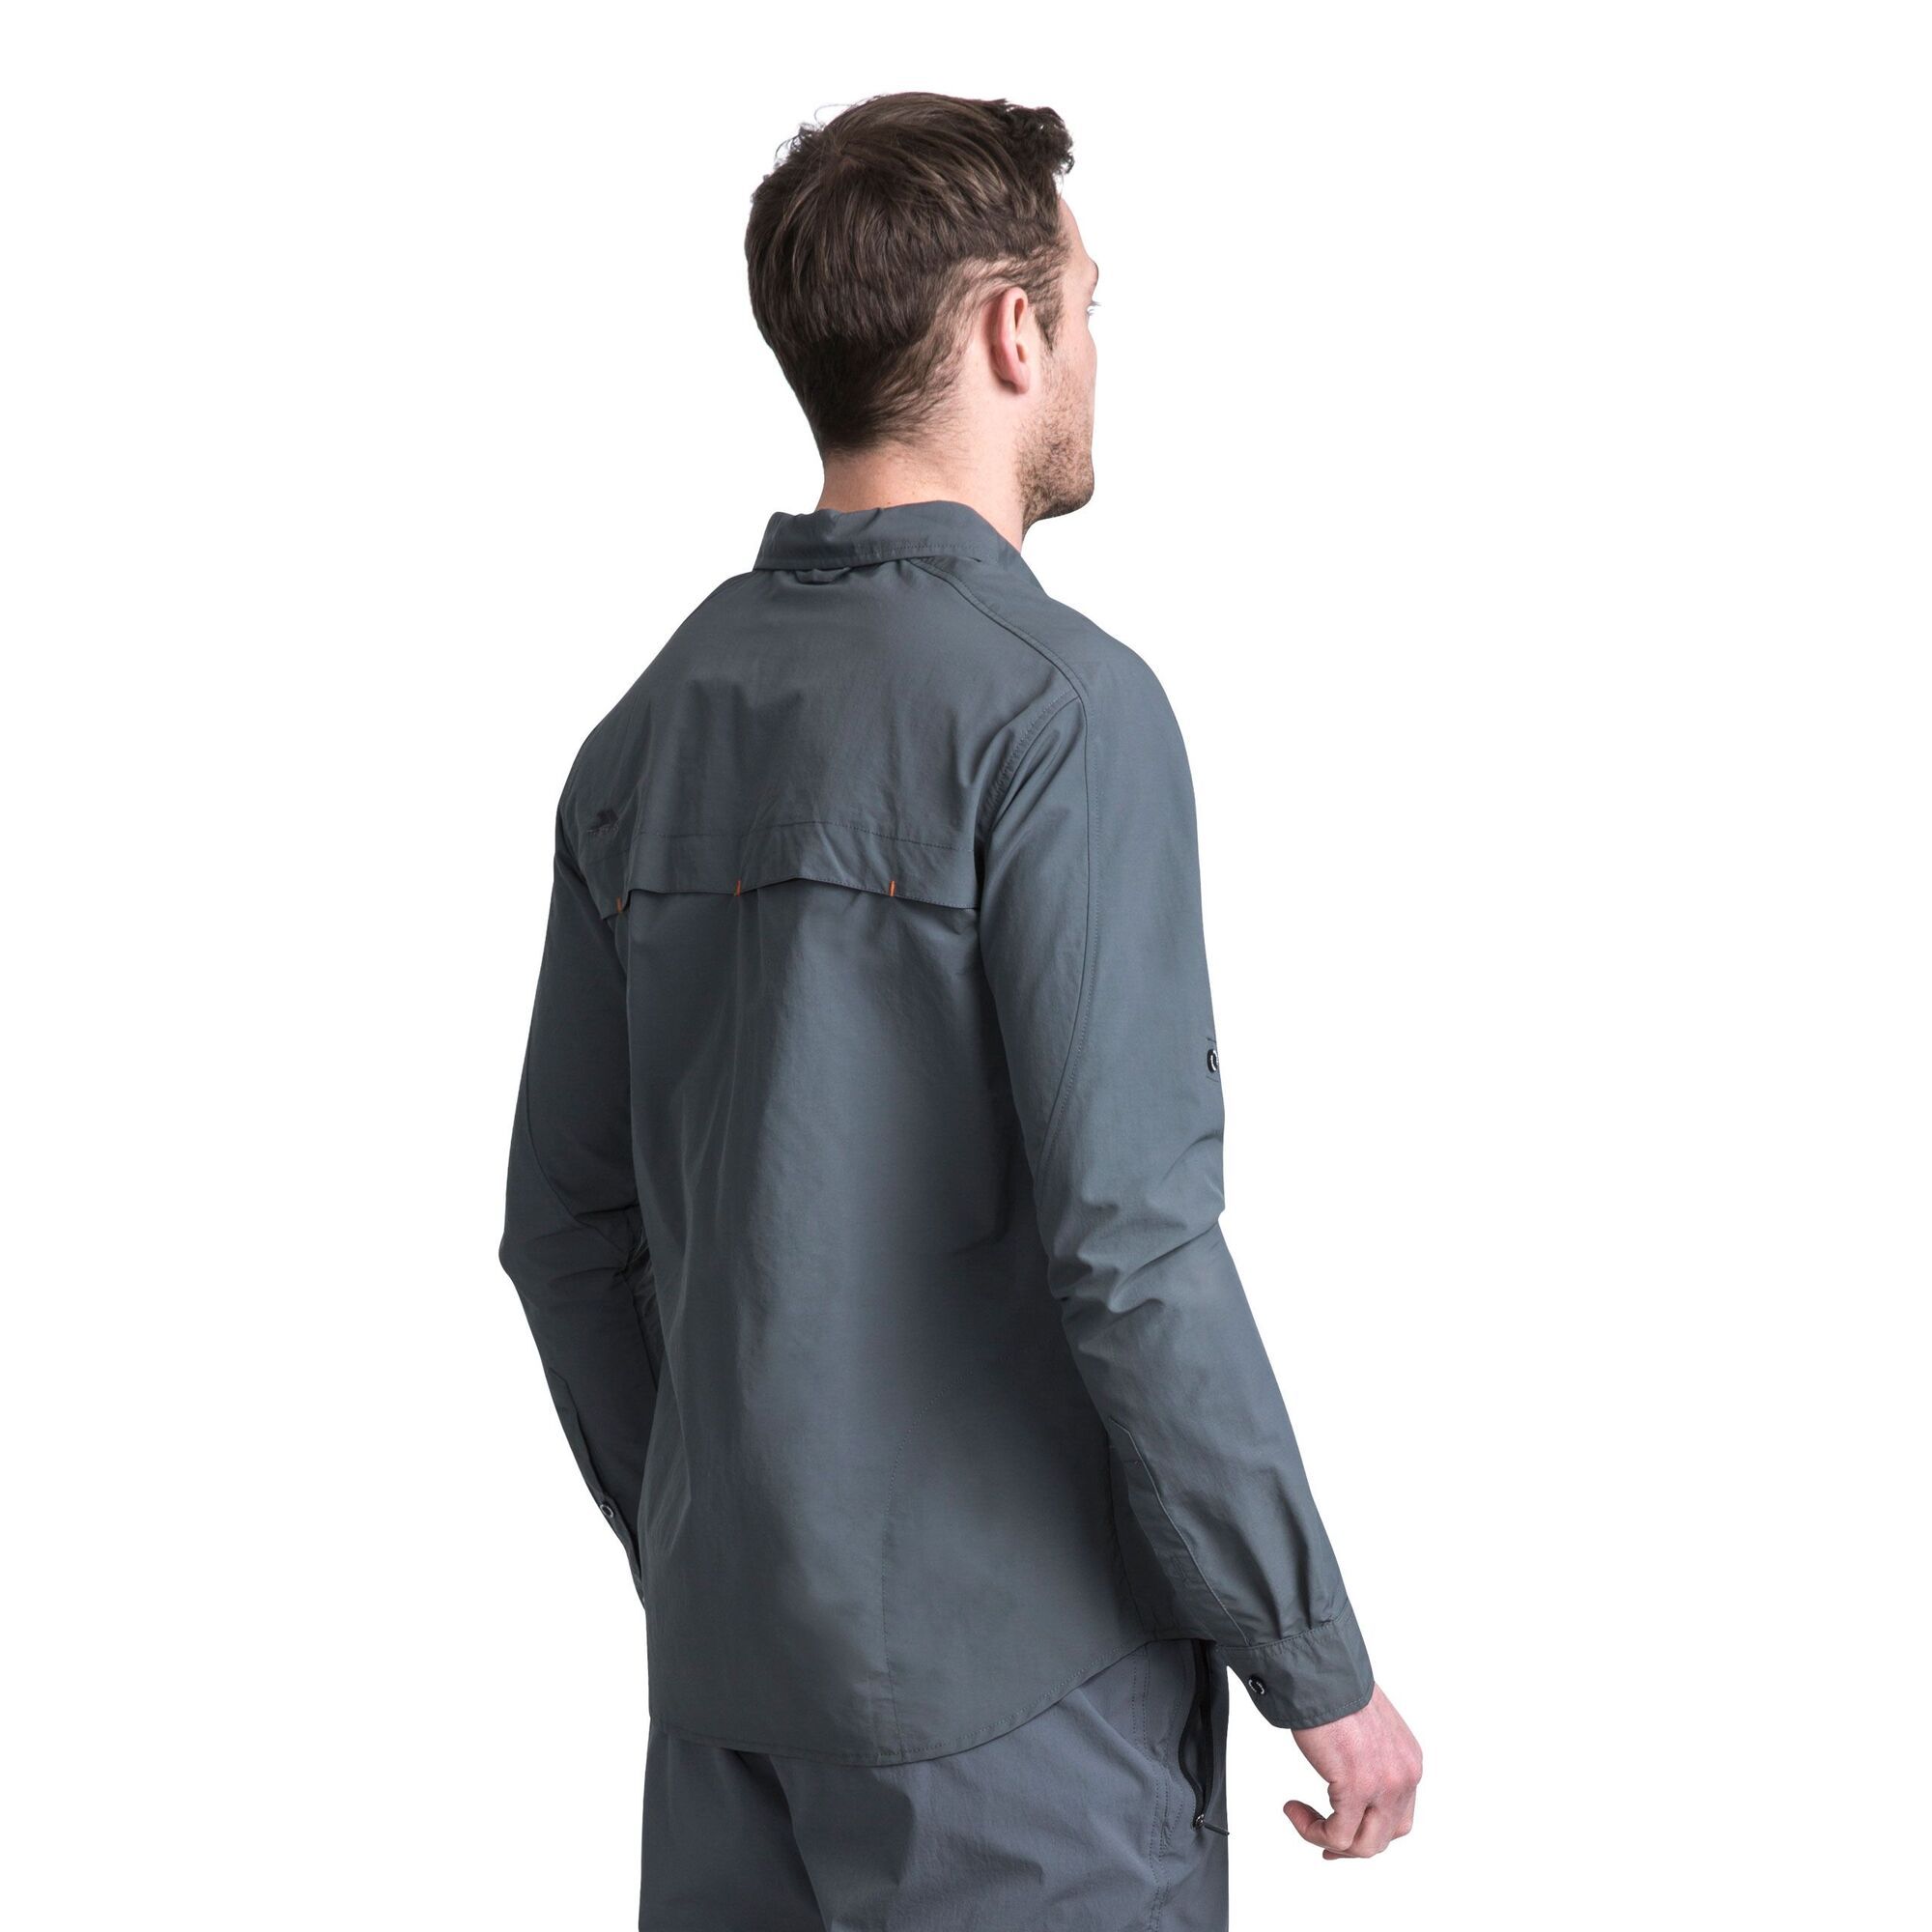 2 piece collar. Long, roll-up sleeves. Button fastening. Chest patch pocket. Zip chest pocket. Concealed zip pocket. Mesh lined vent. Quick dry. UV 40+. Mosquito repellent finish. 100% Polyamide. Trespass Mens Chest Sizing (approx): S - 35-37in/89-94cm, M - 38-40in/96.5-101.5cm, L - 41-43in/104-109cm, XL - 44-46in/111.5-117cm, XXL - 46-48in/117-122cm, 3XL - 48-50in/122-127cm.